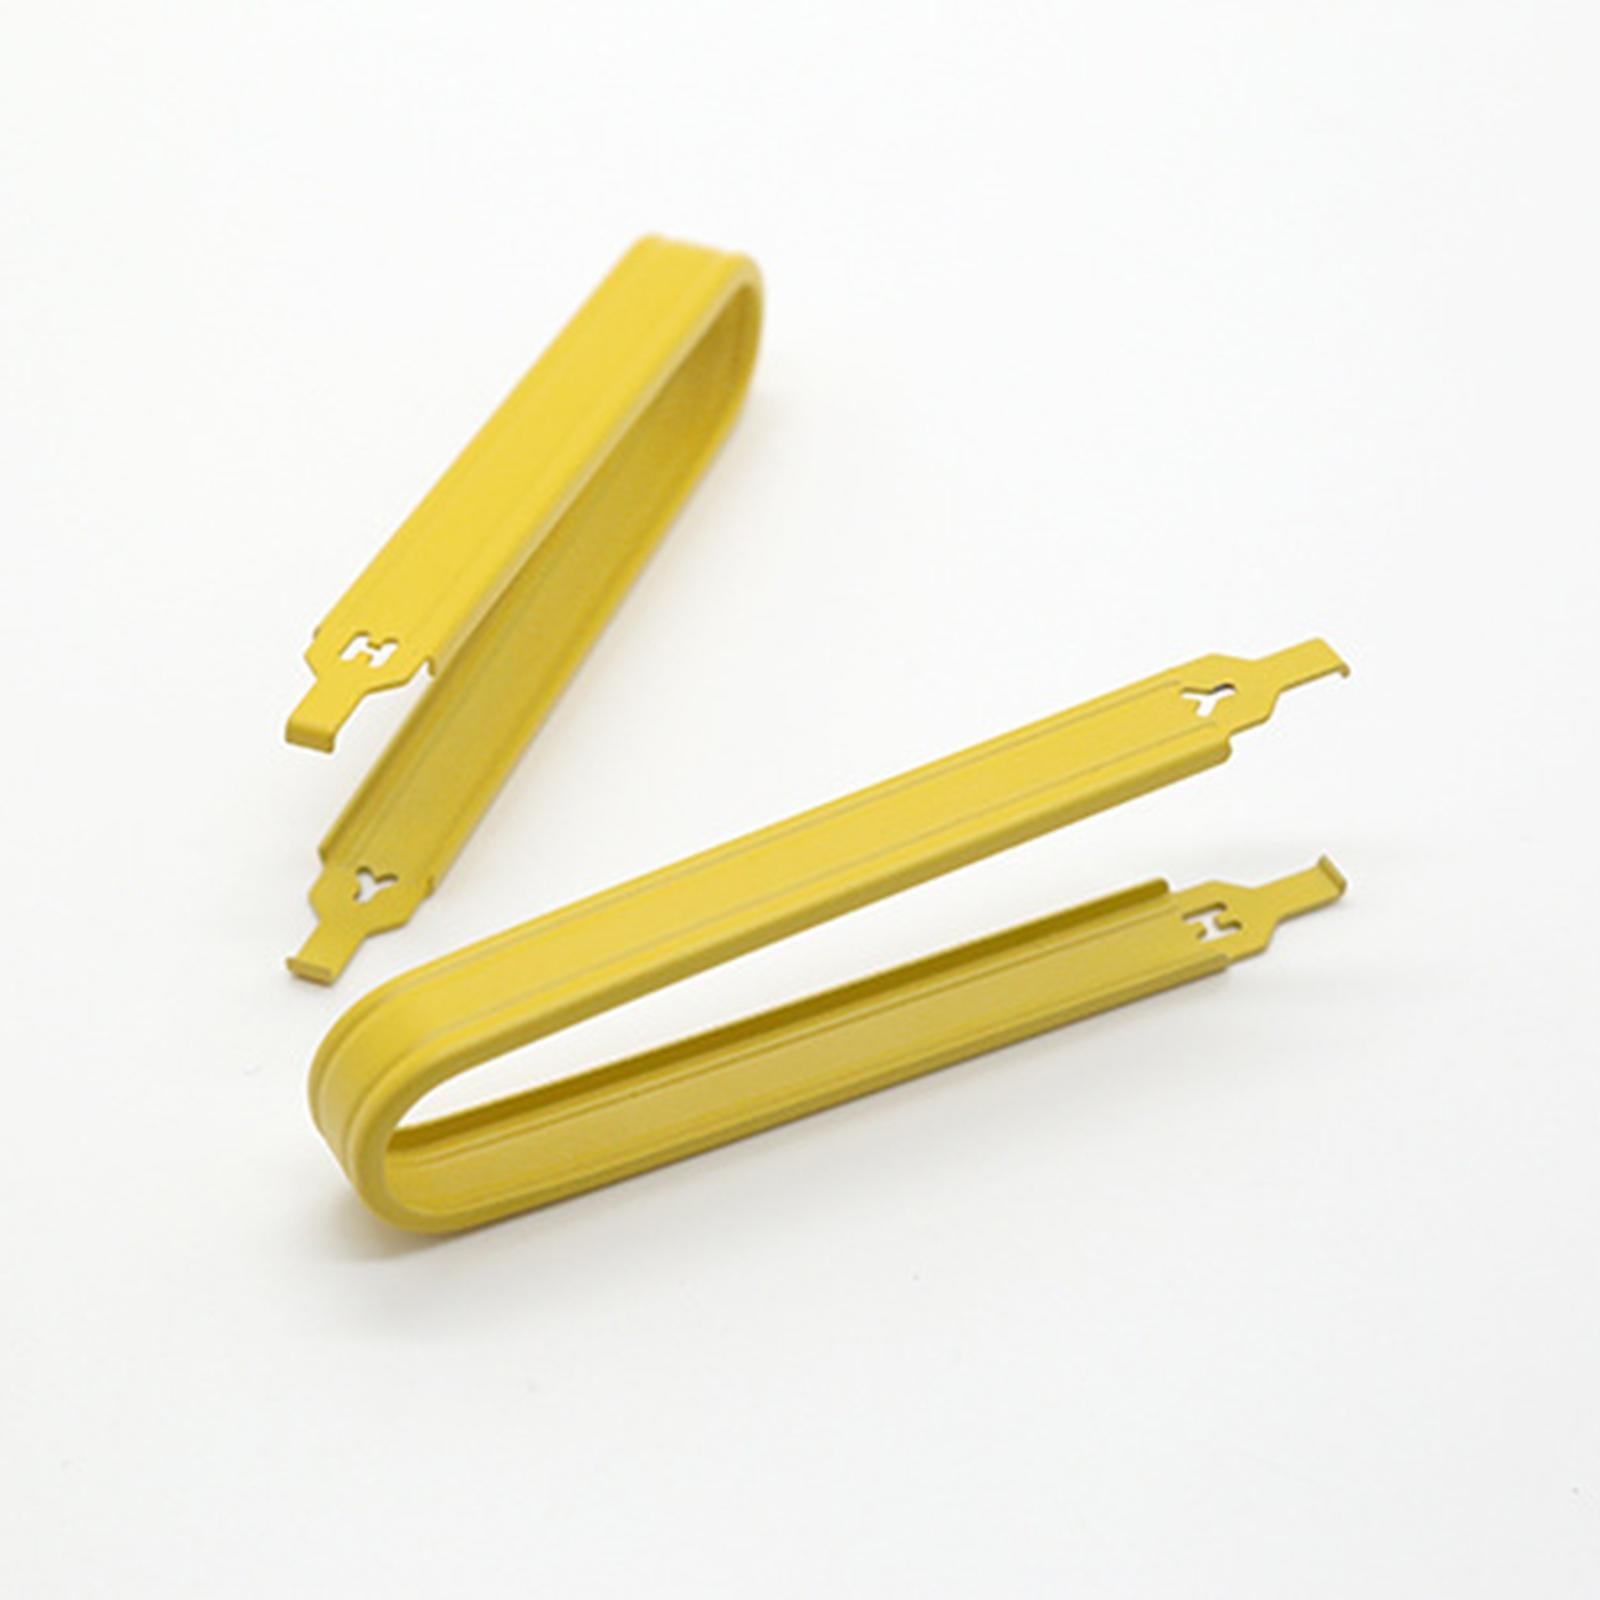 Yellow Keyboard Switch Puller Antistatic Clip Pliers Professional Tool